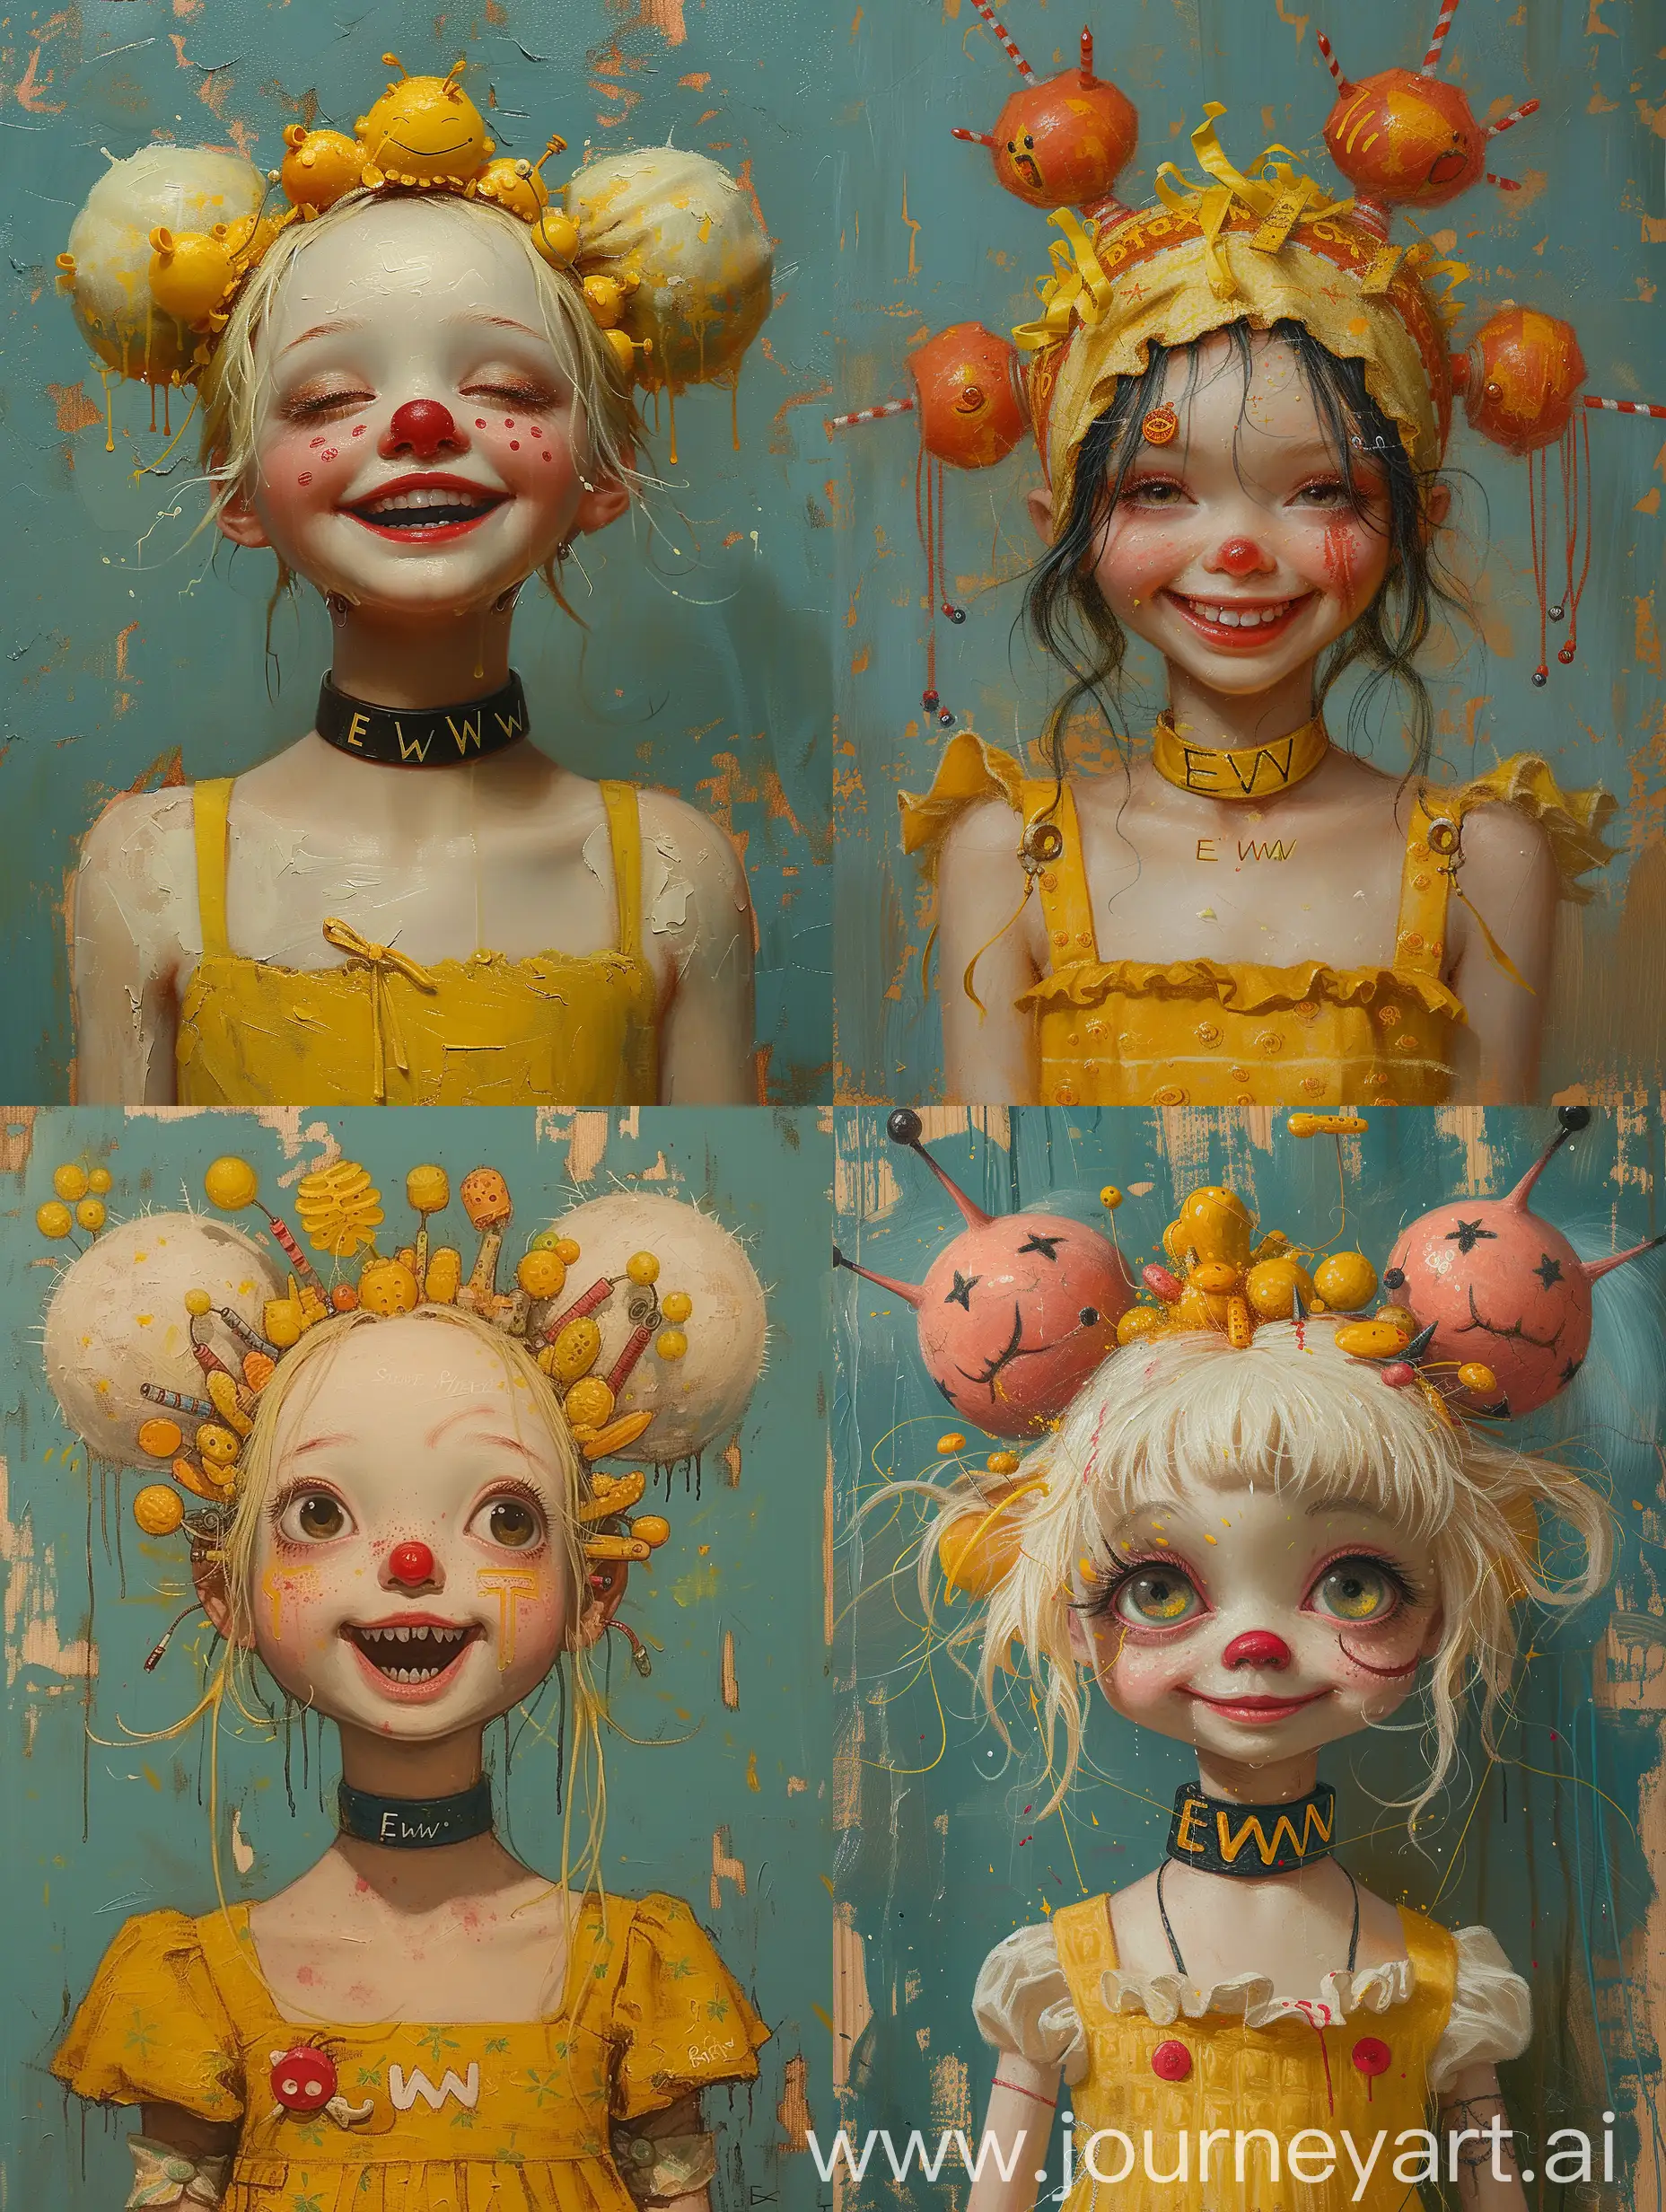 Cheerful-China-Clown-Doll-with-Surreal-Yellow-Accents-in-Amusing-Matte-Oil-Painting